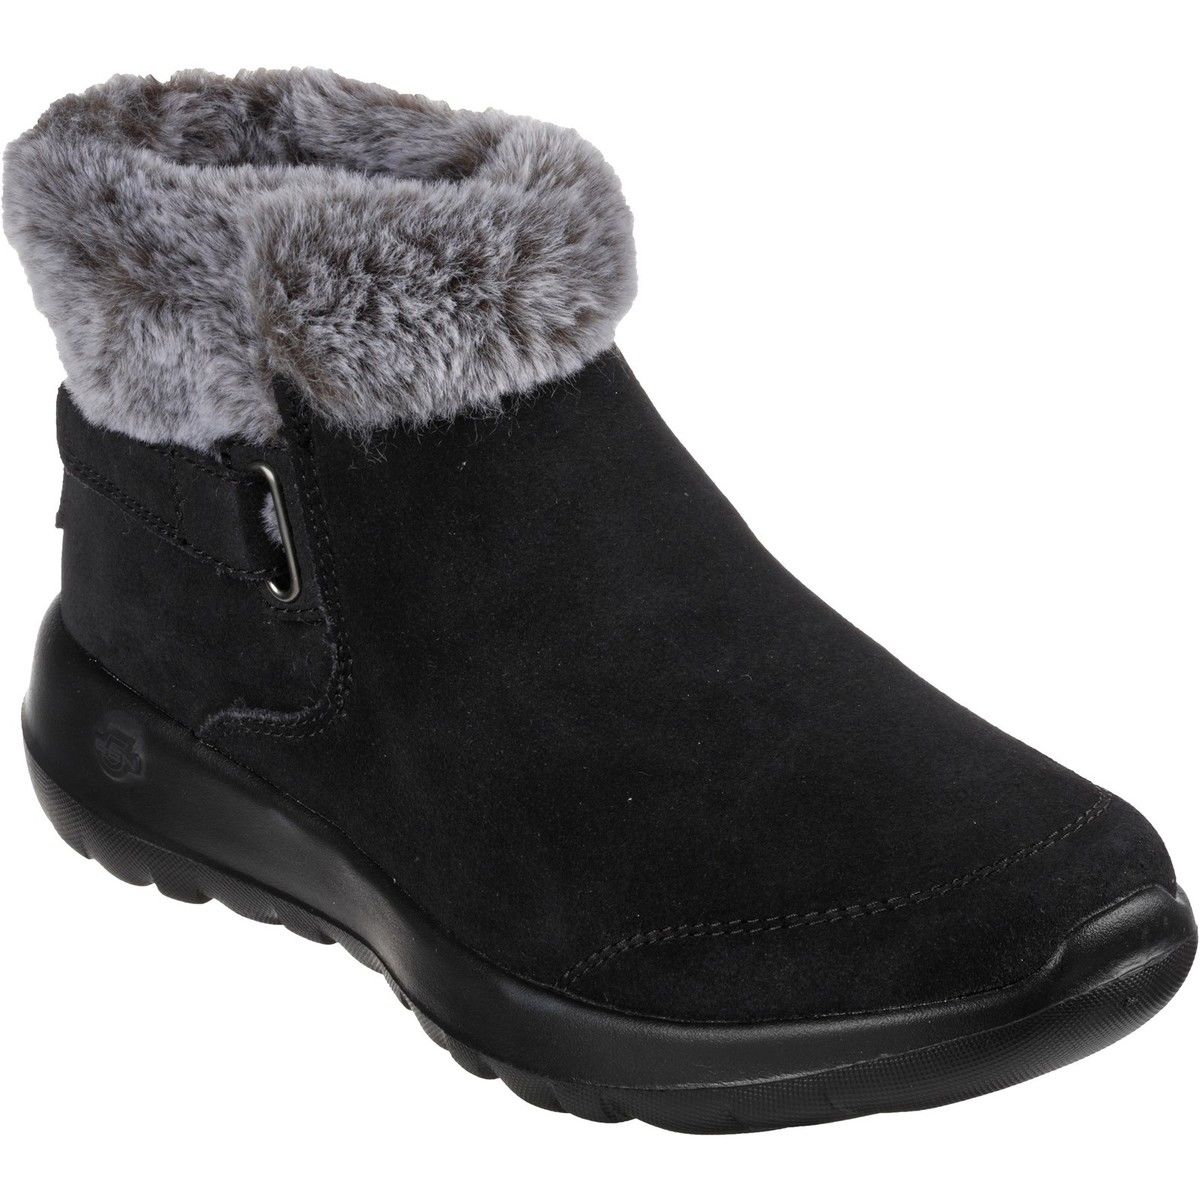 Skechers On-the-go Joy First Glance BKGY Black grey Womens ankle boots in a Plain Leather in Size 4